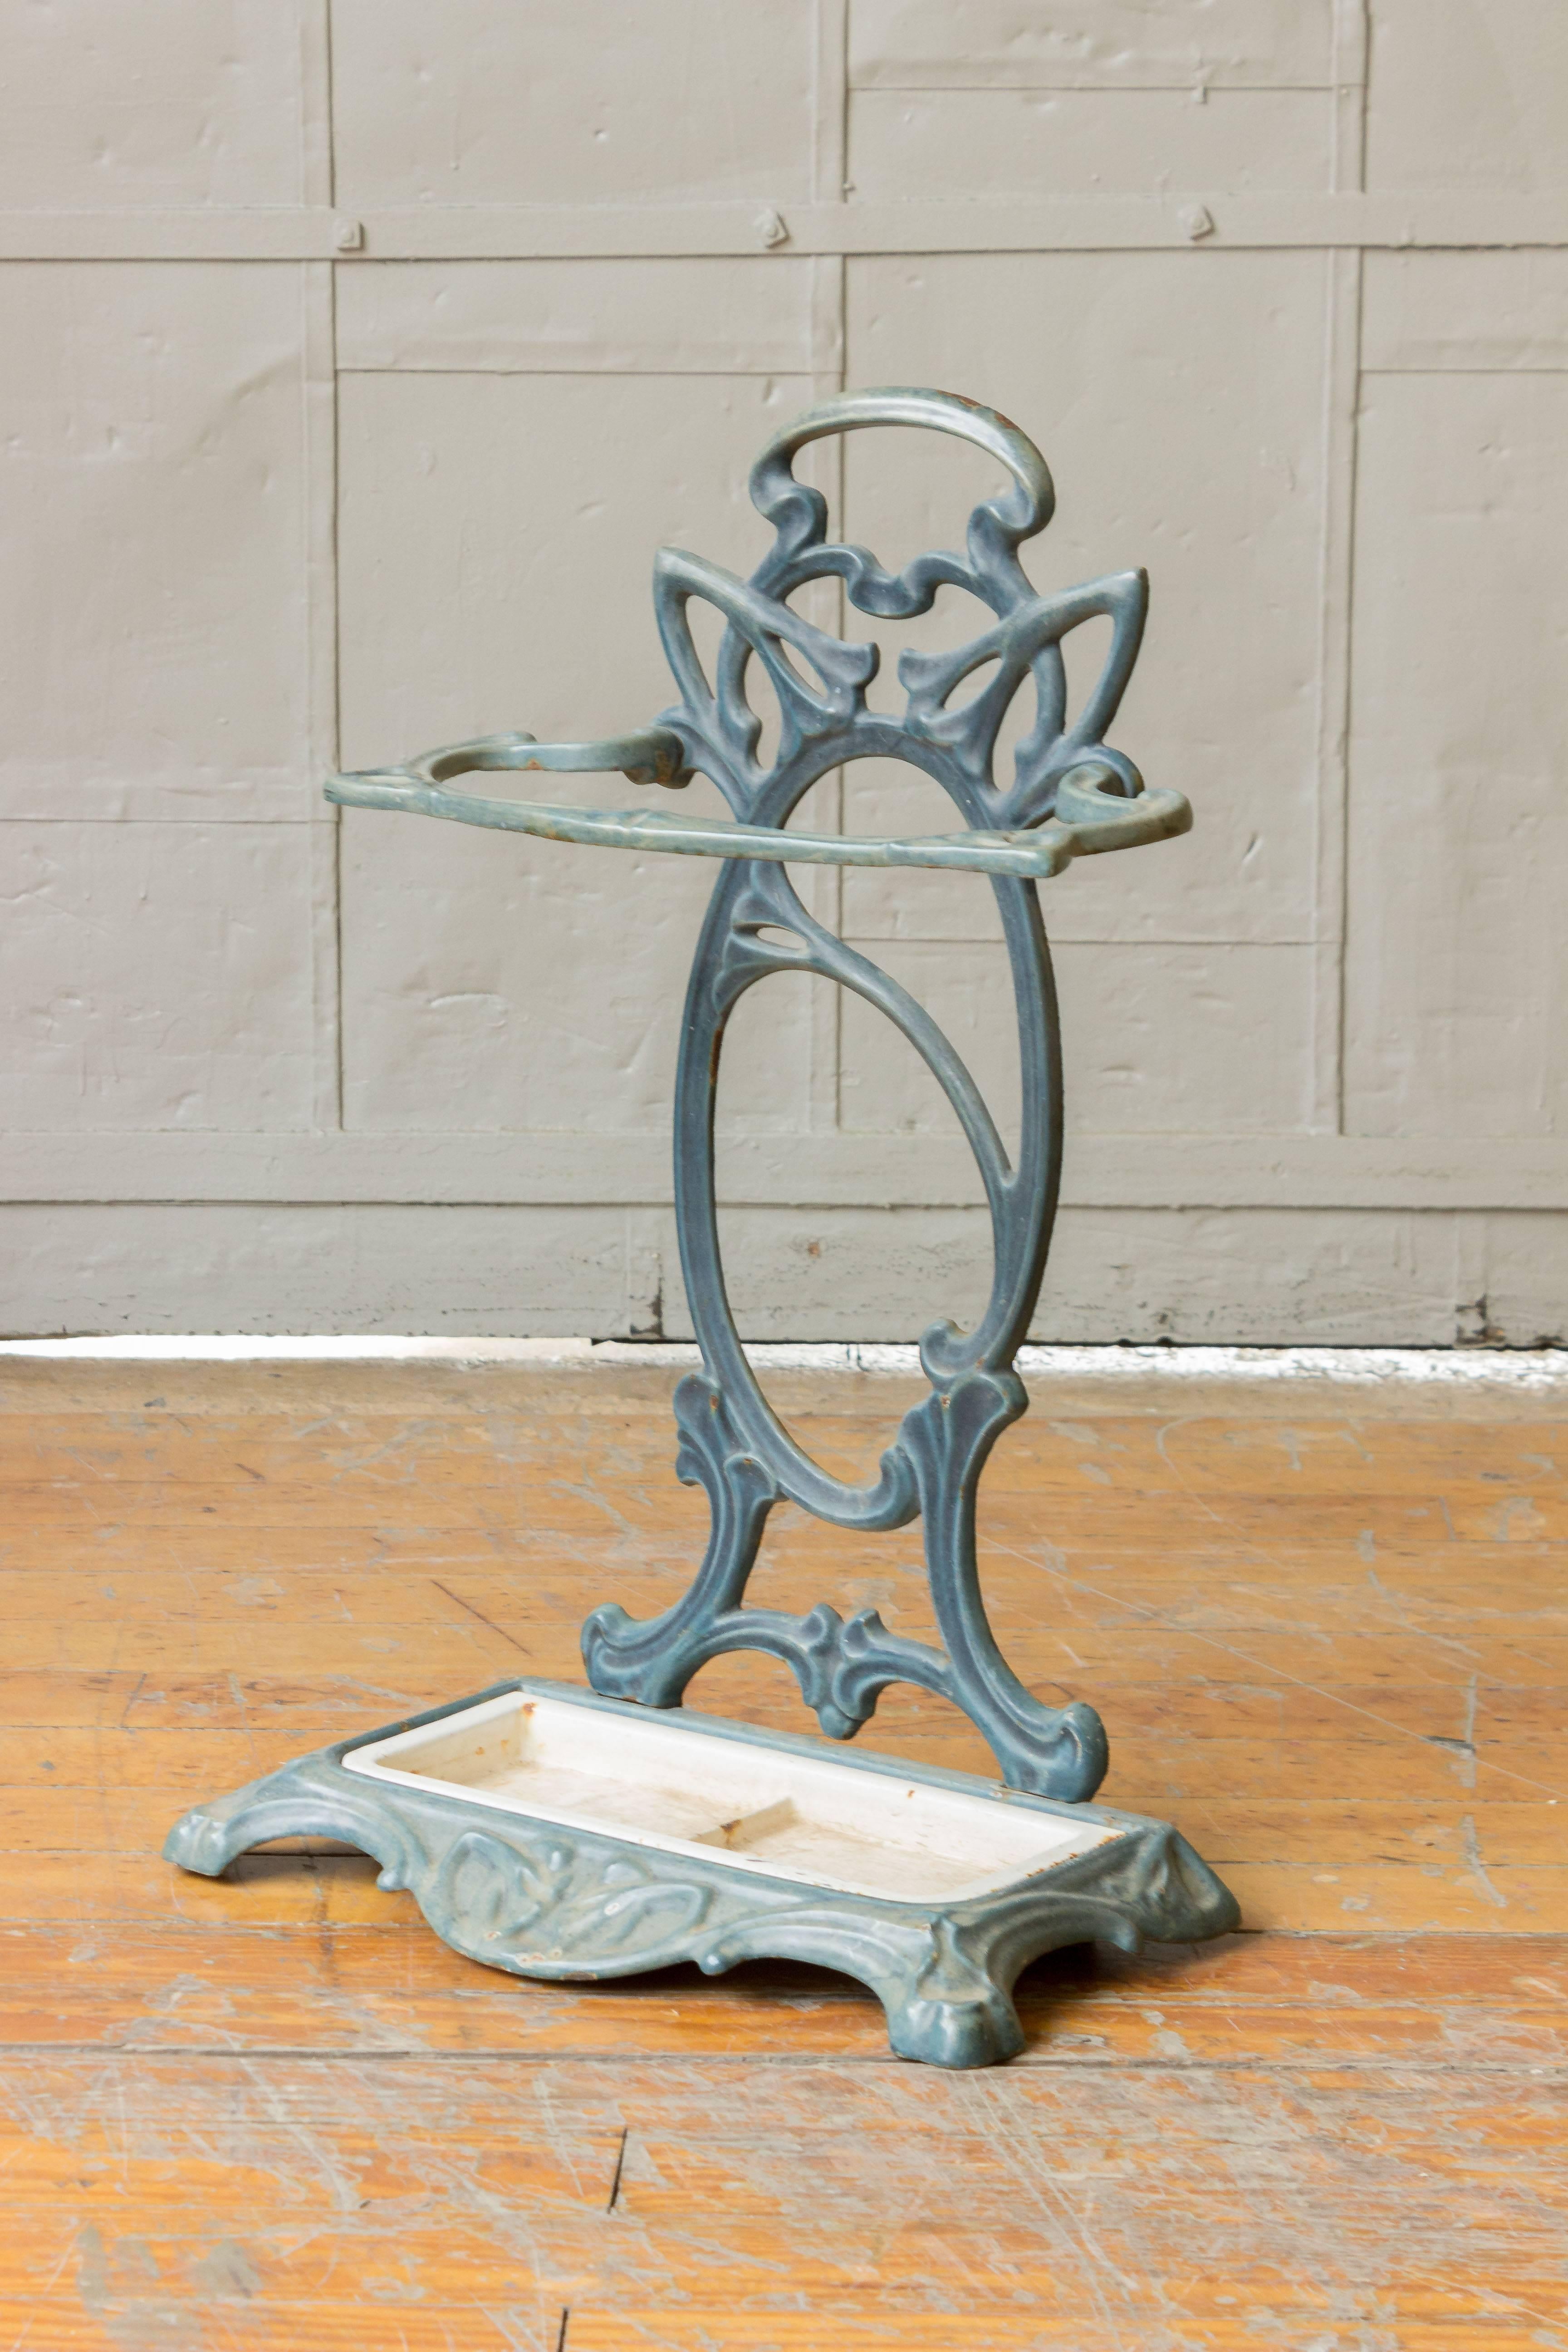 An enameled iron umbrella stand in the Art Nouveau style with a removable tray, French, circa 1920.